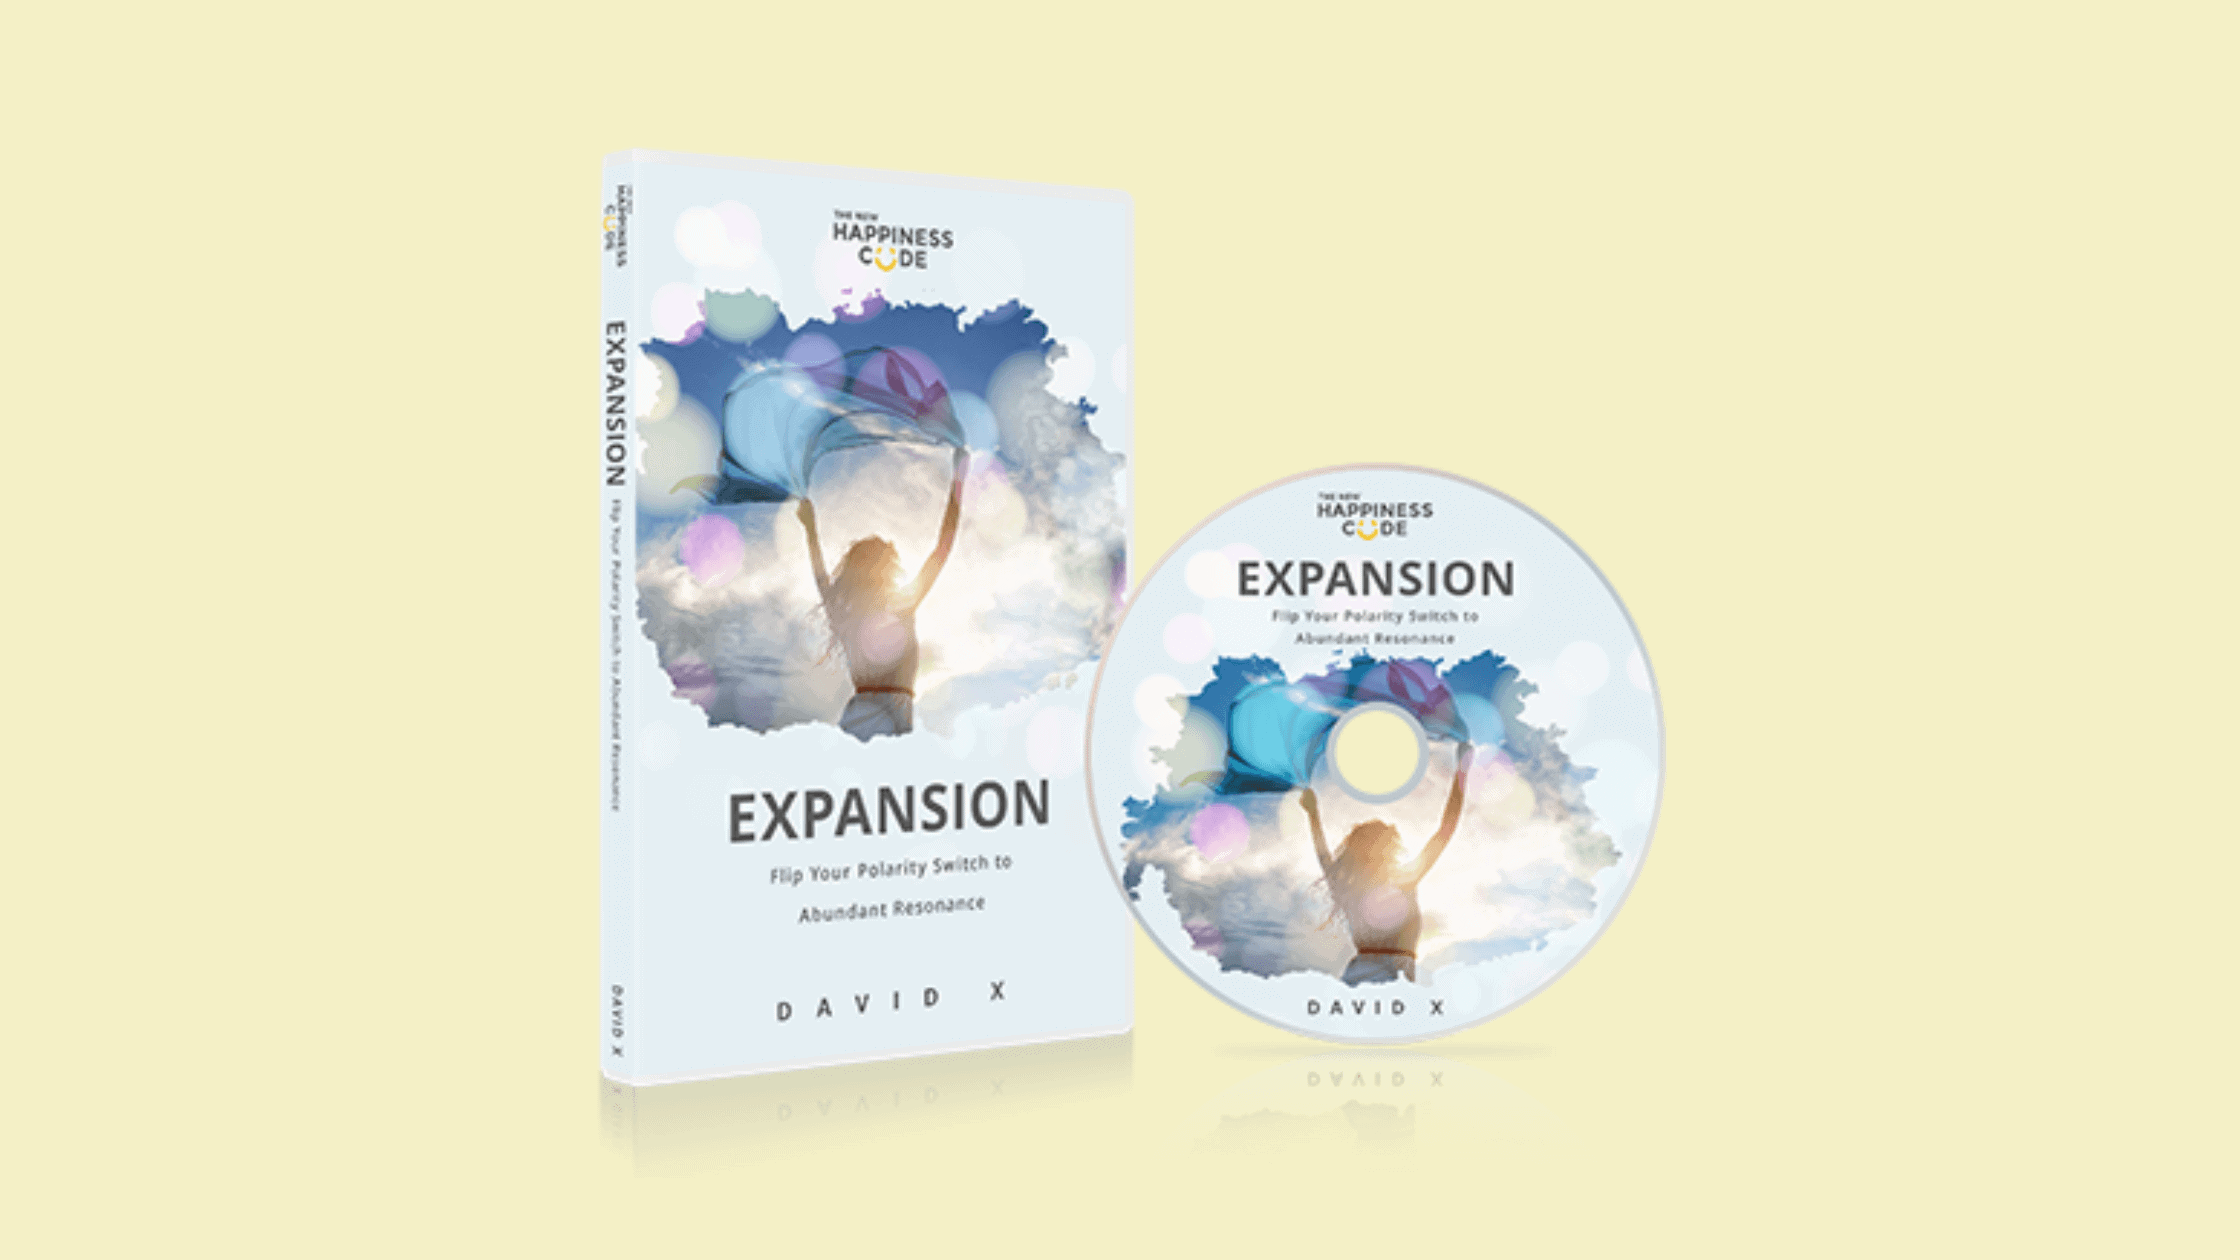 The New Happiness Code Expansion